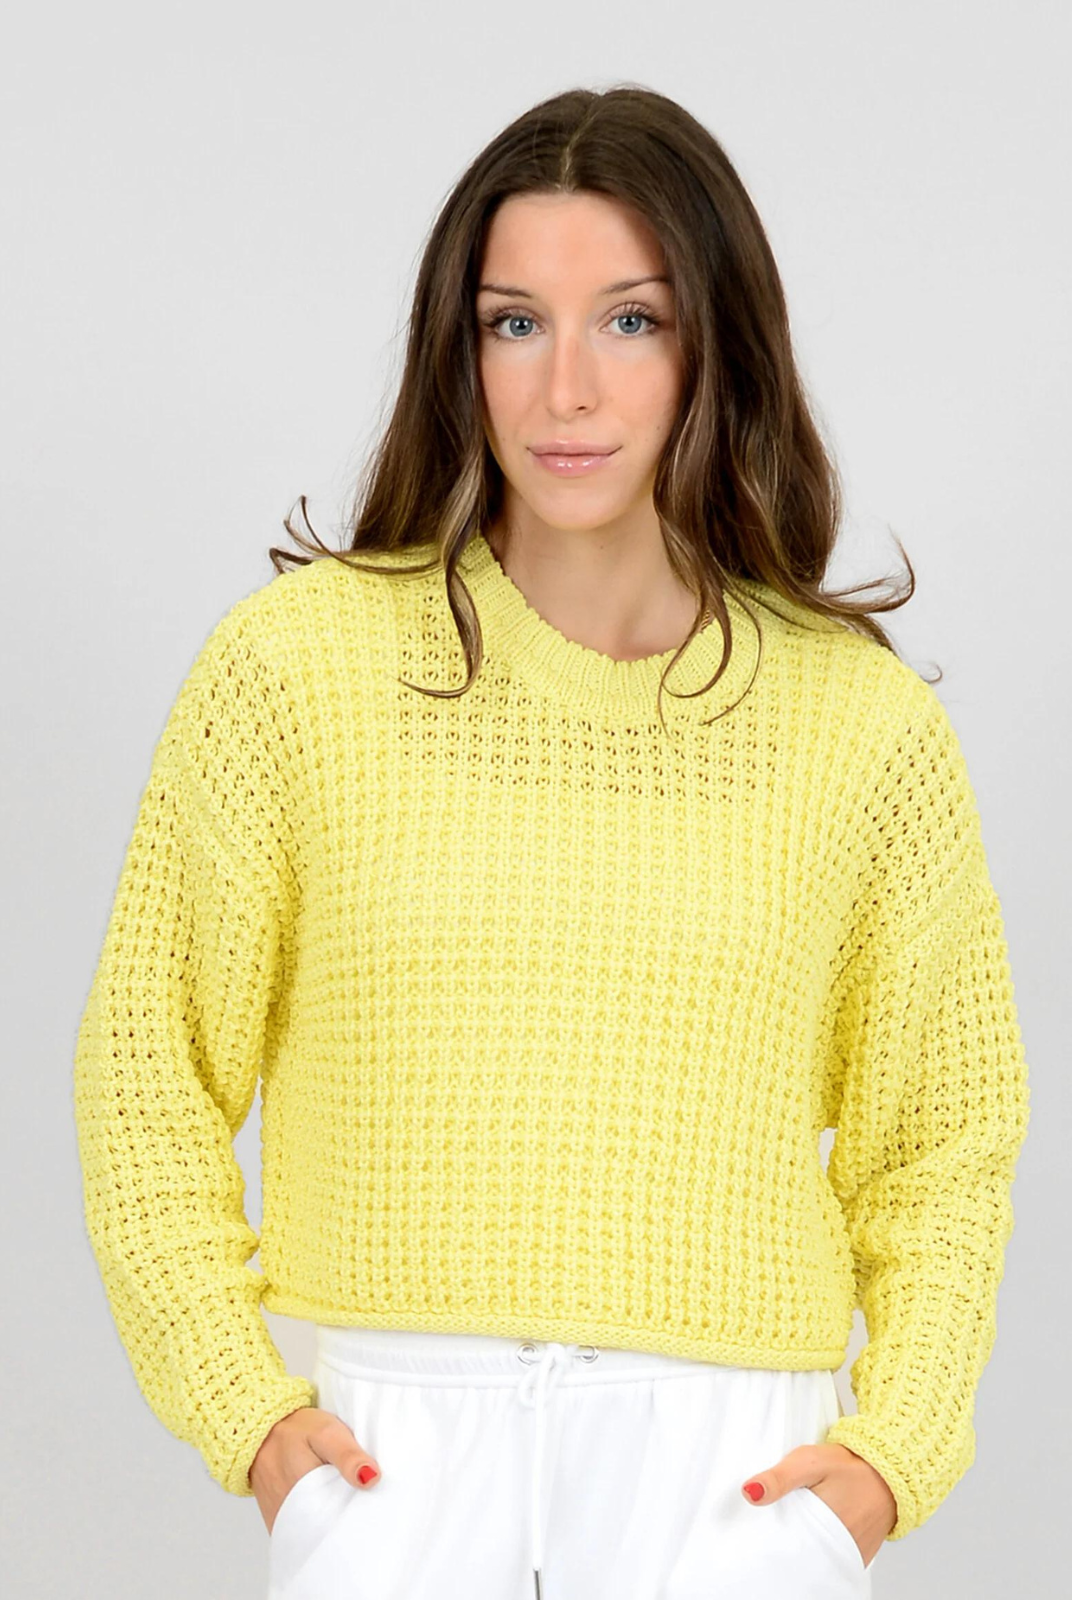 Darla Long Sleeve Crew Neck- Lemon. The the perfect lightweight sweater, in a gorgeous lemon to transition through the seasons! The cuteness of this sweater will be hard to top. Wear with a tank top or over a blouse for a different look.